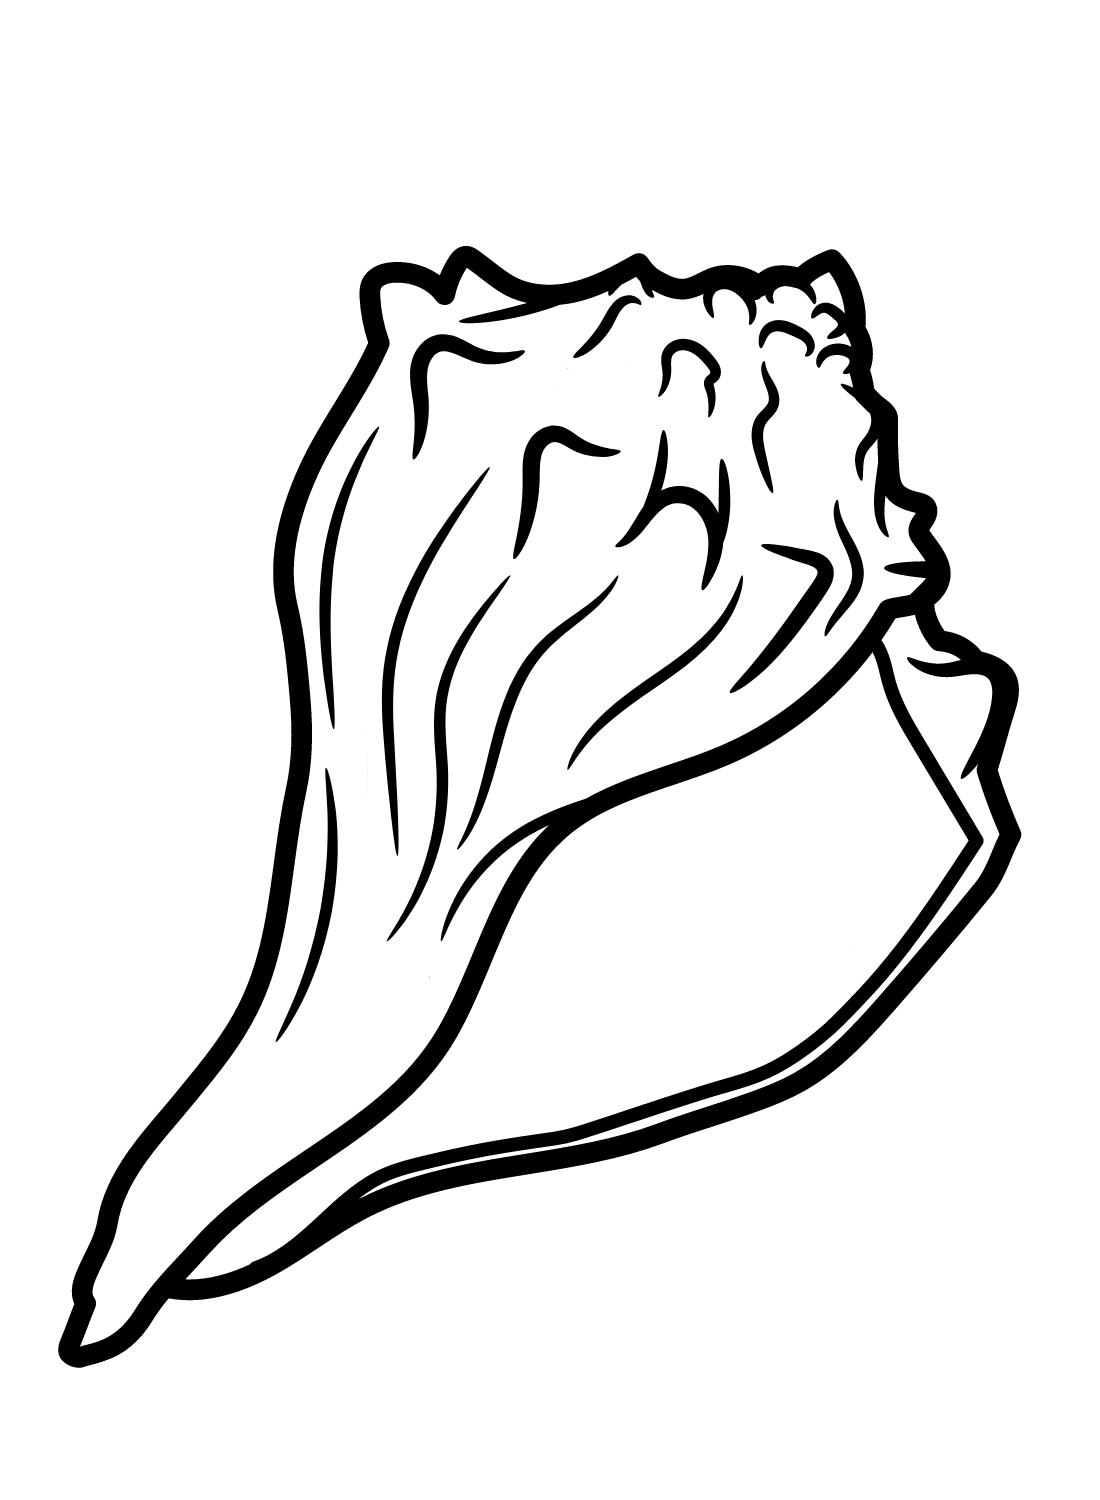 conch shell coloring pages